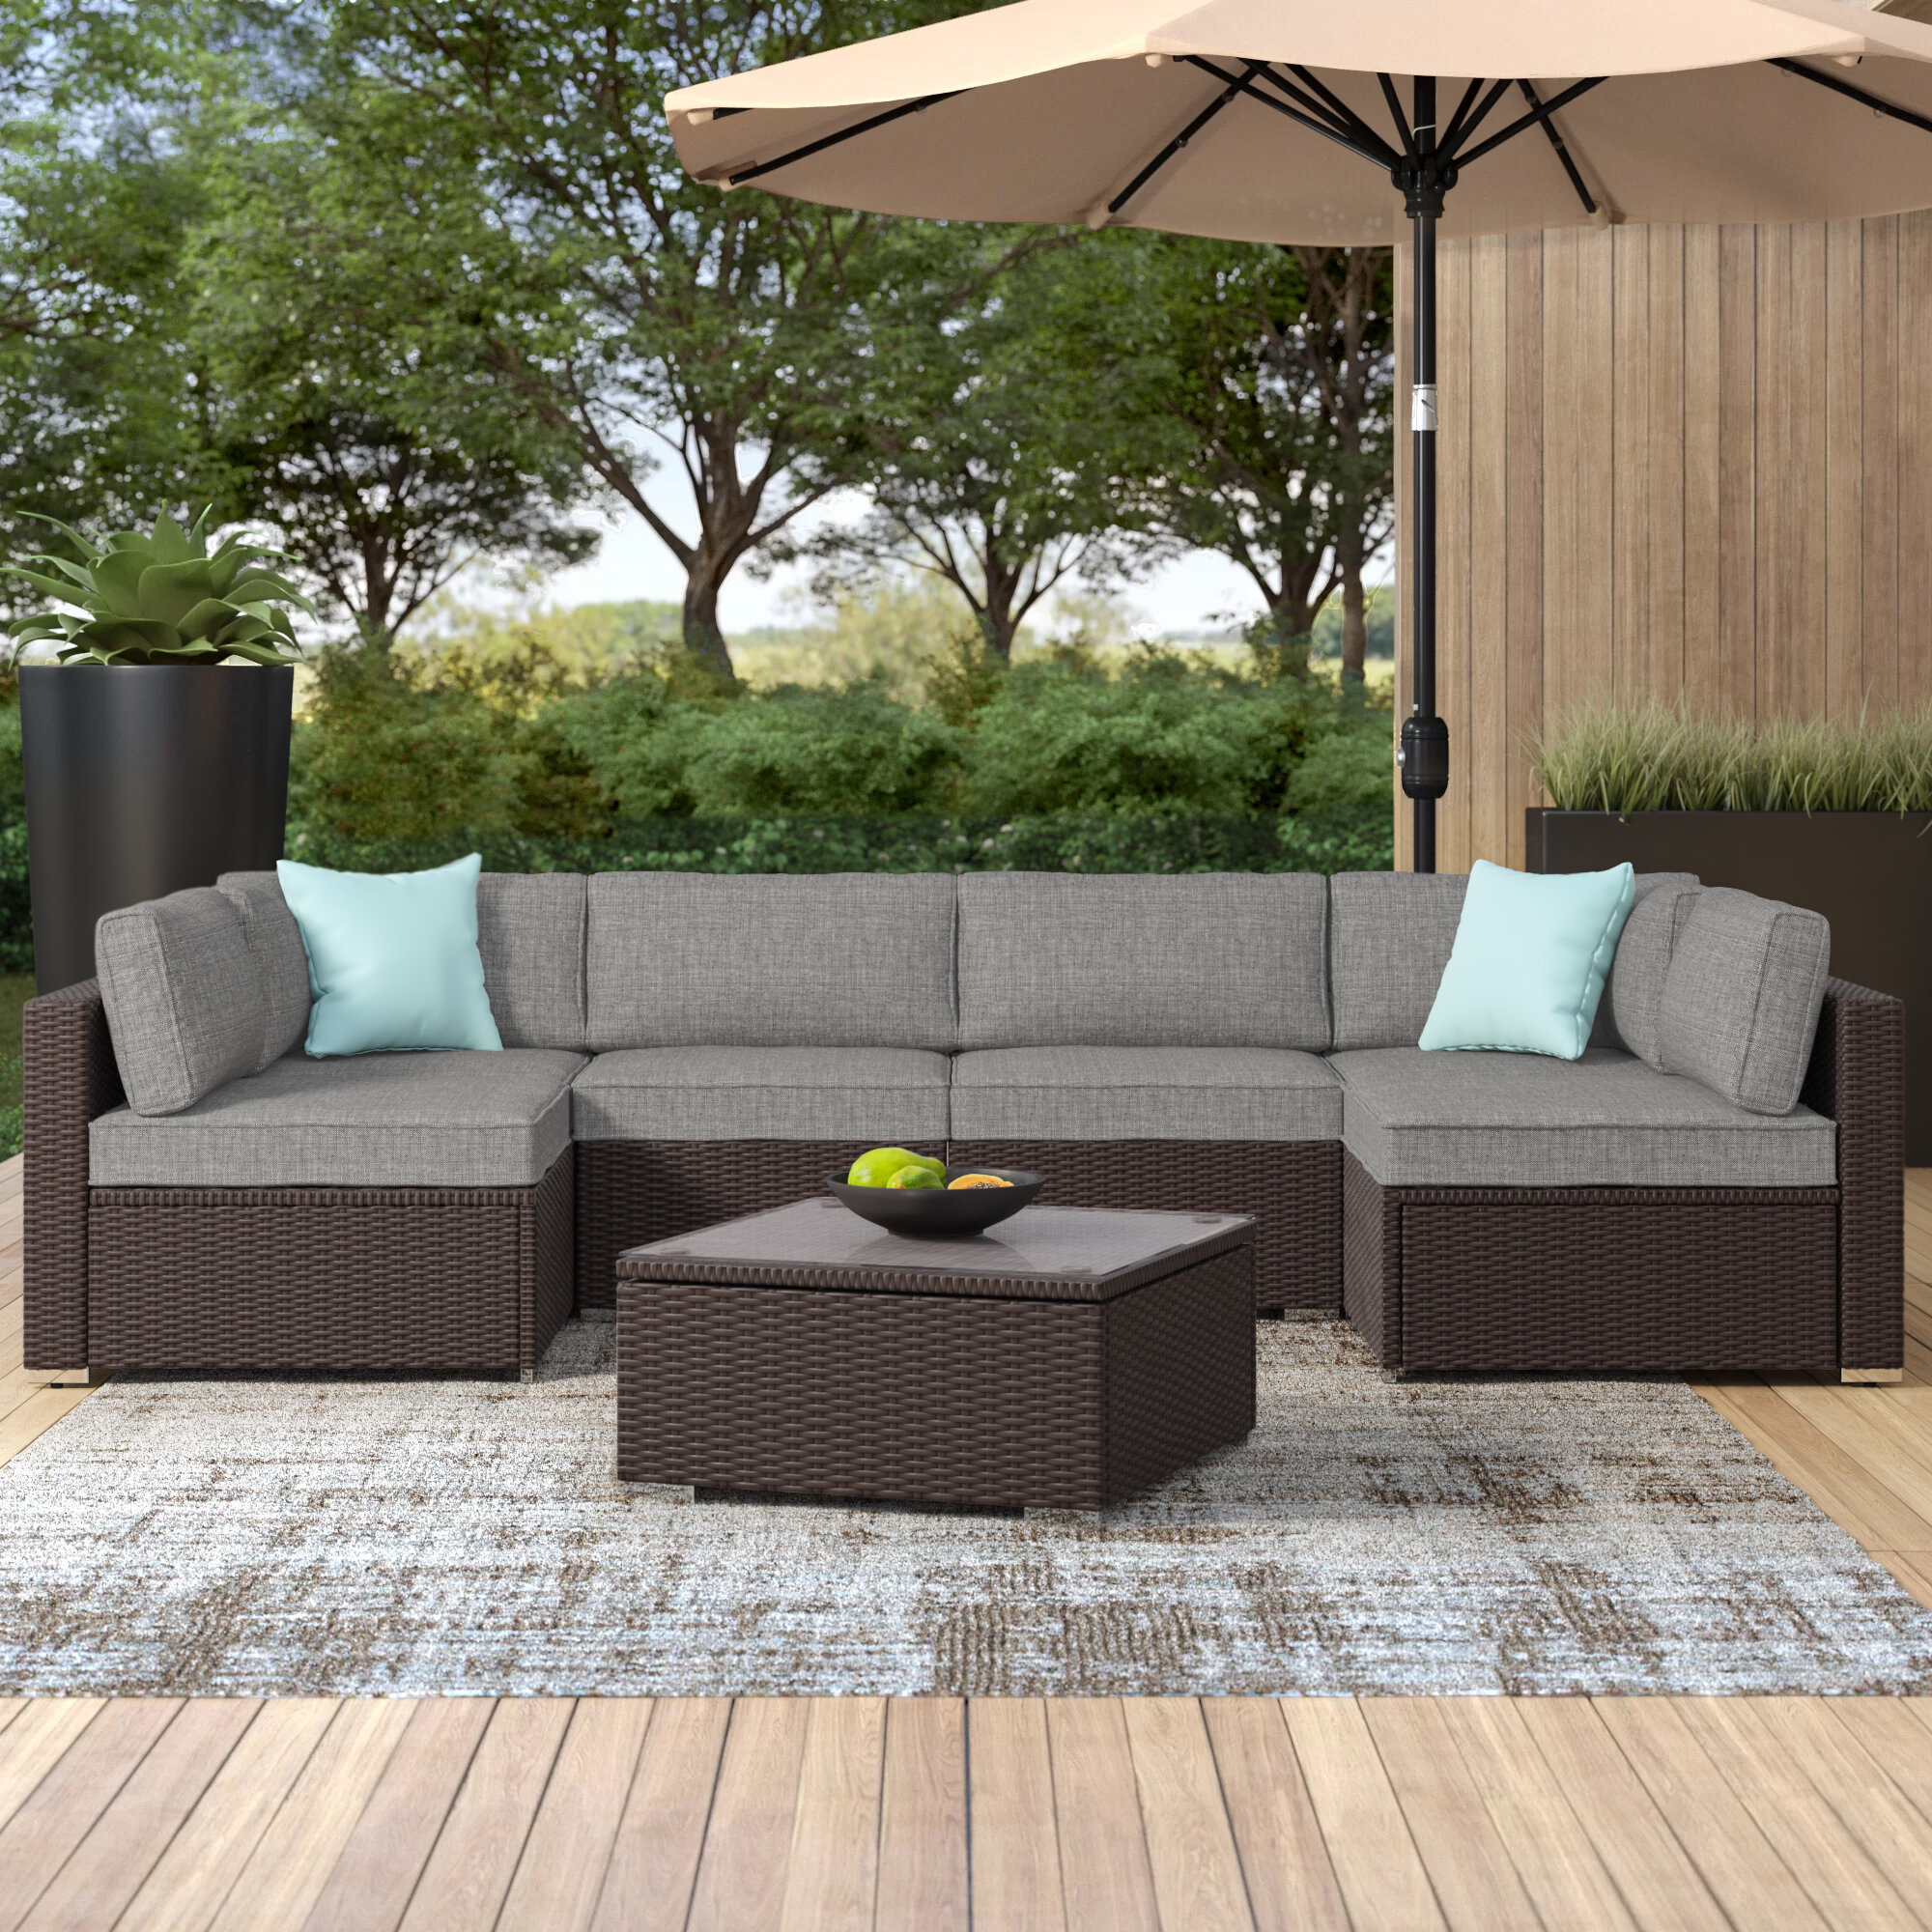 4 Piece Sofa Set with Cushions Brown Grey PVC Wicker Weather Resistant 